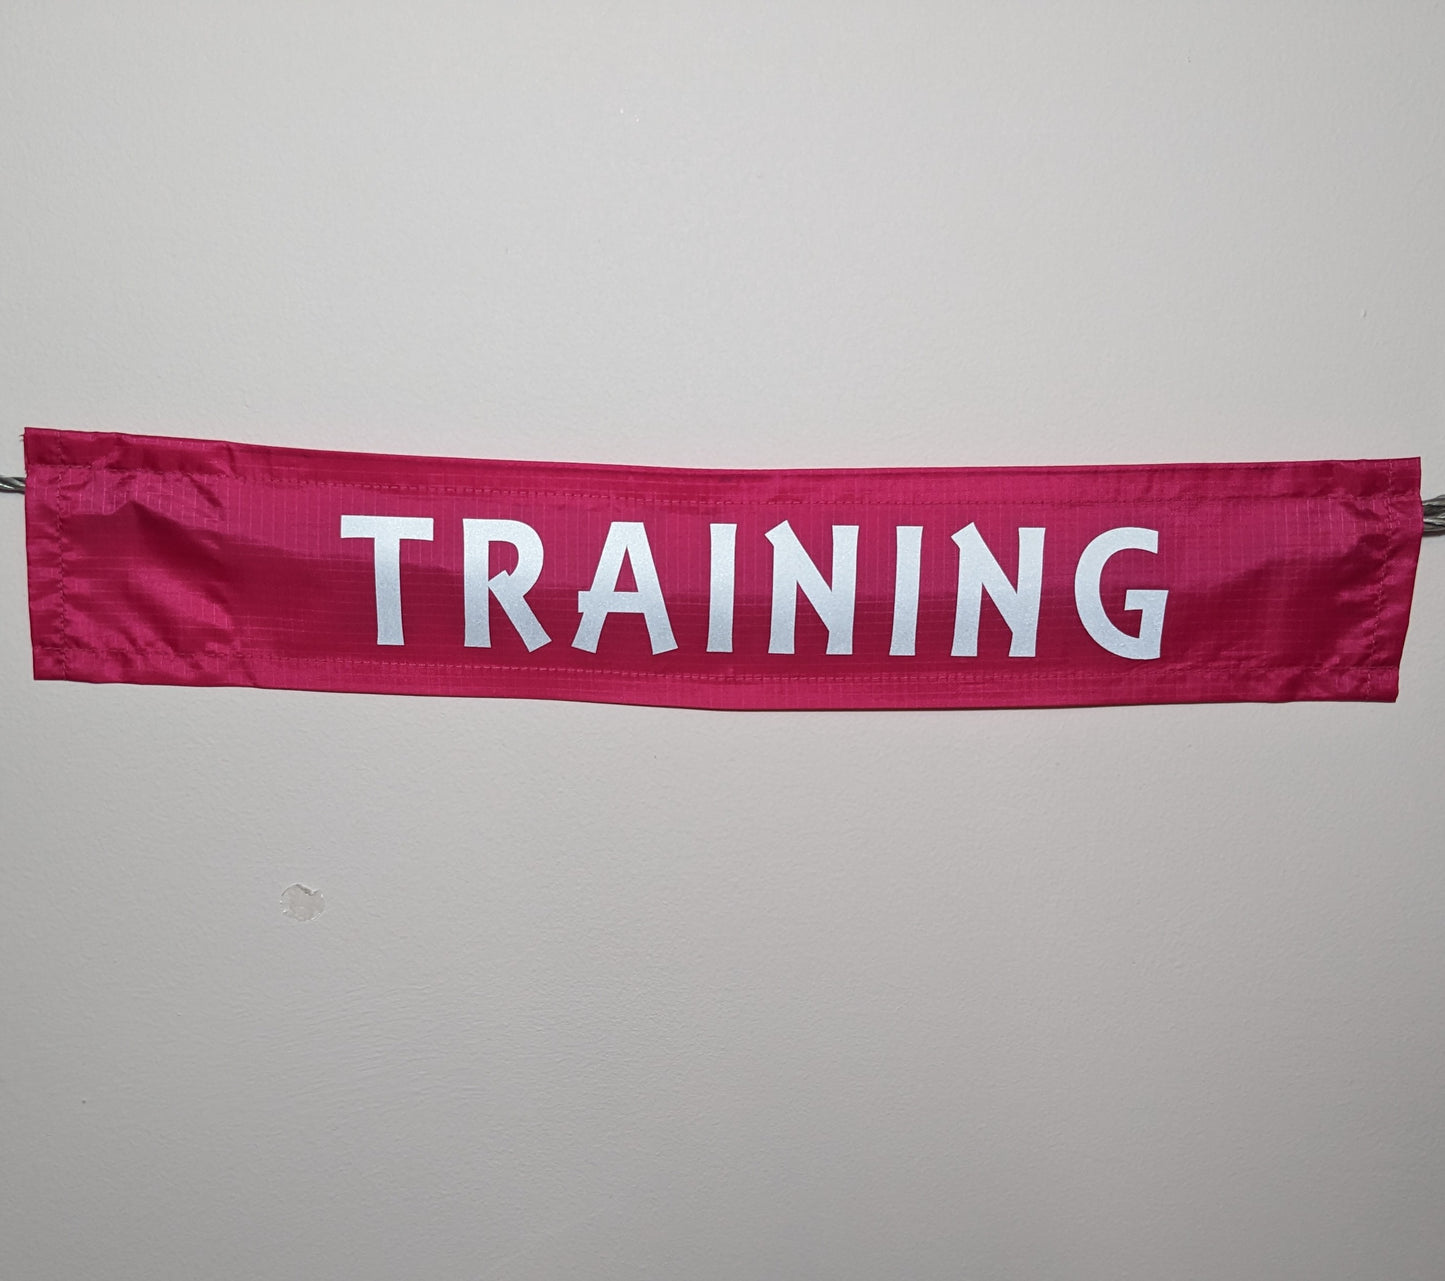 "Training" Dog lead sleeve in deep pink. Cover for dog leash - canine training - puppy socialising - reactive dog - support dog